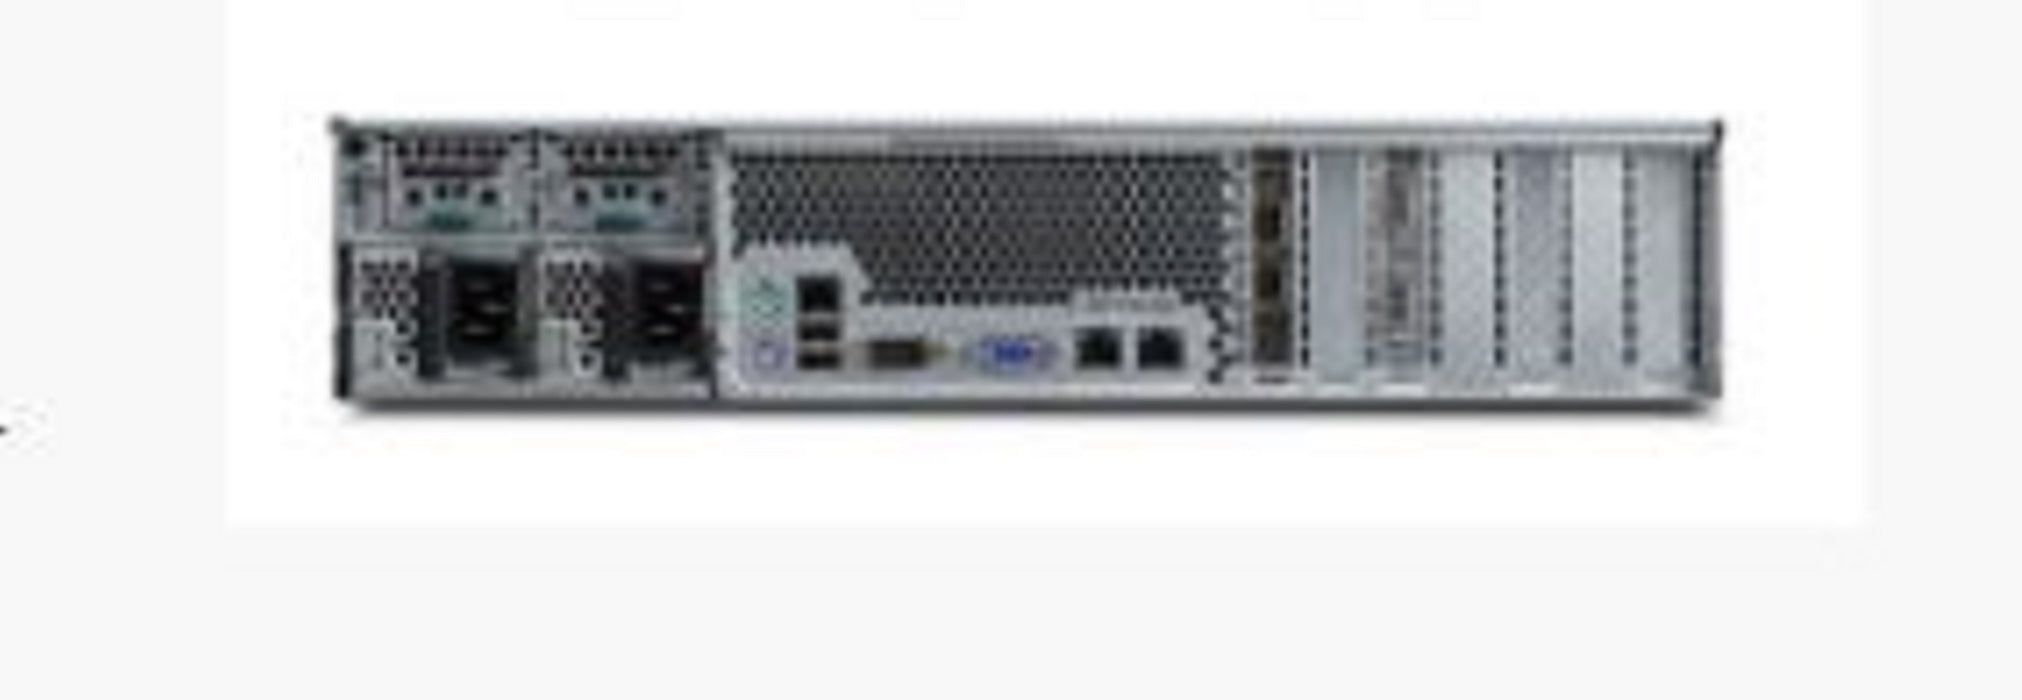 Isilon X200 216TB 9-Node Cluster with 2 x 12-Port Infiniband switches